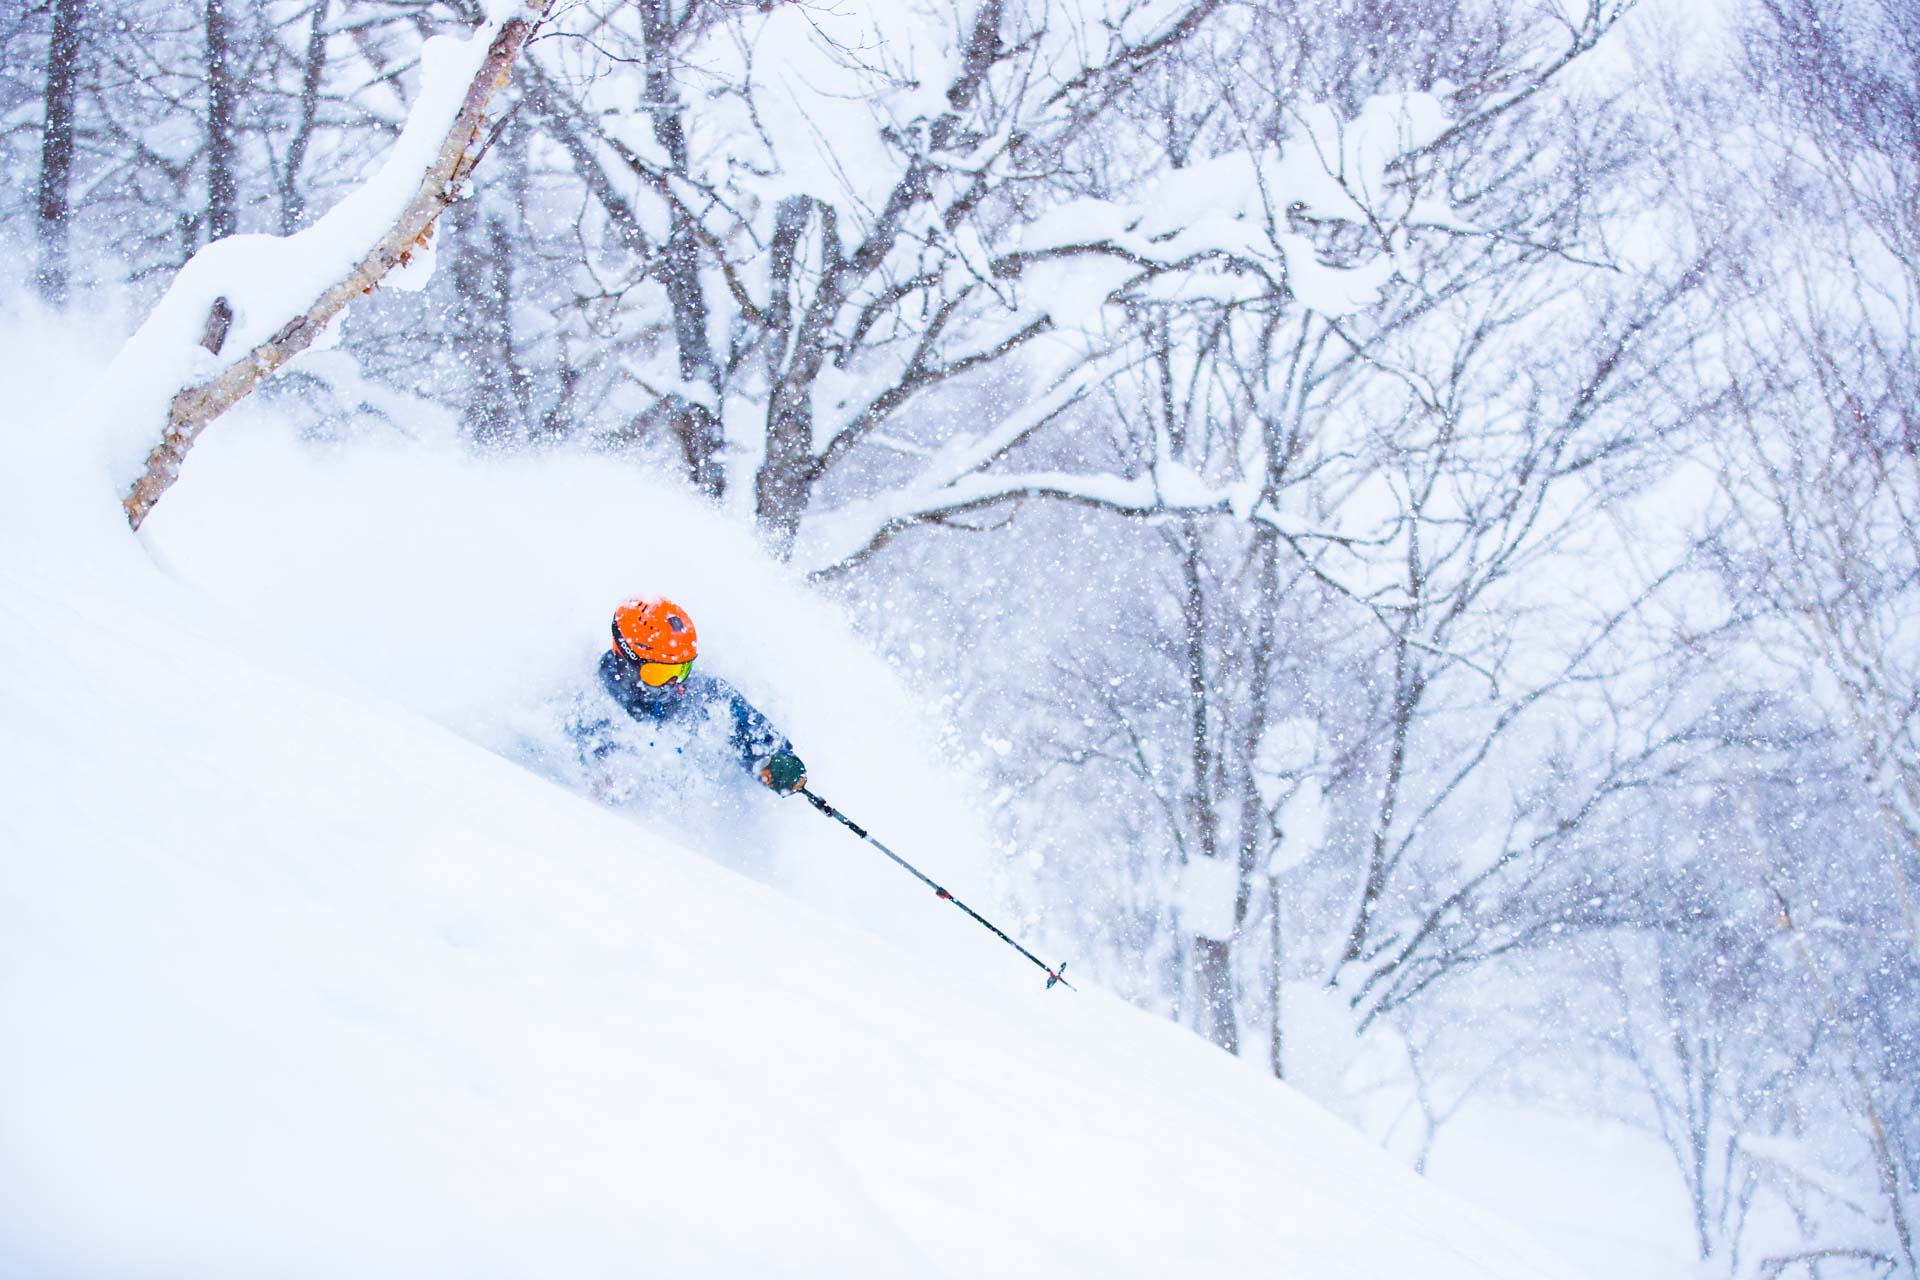 Does Japan Powder Skiing Live Up to the Hype?